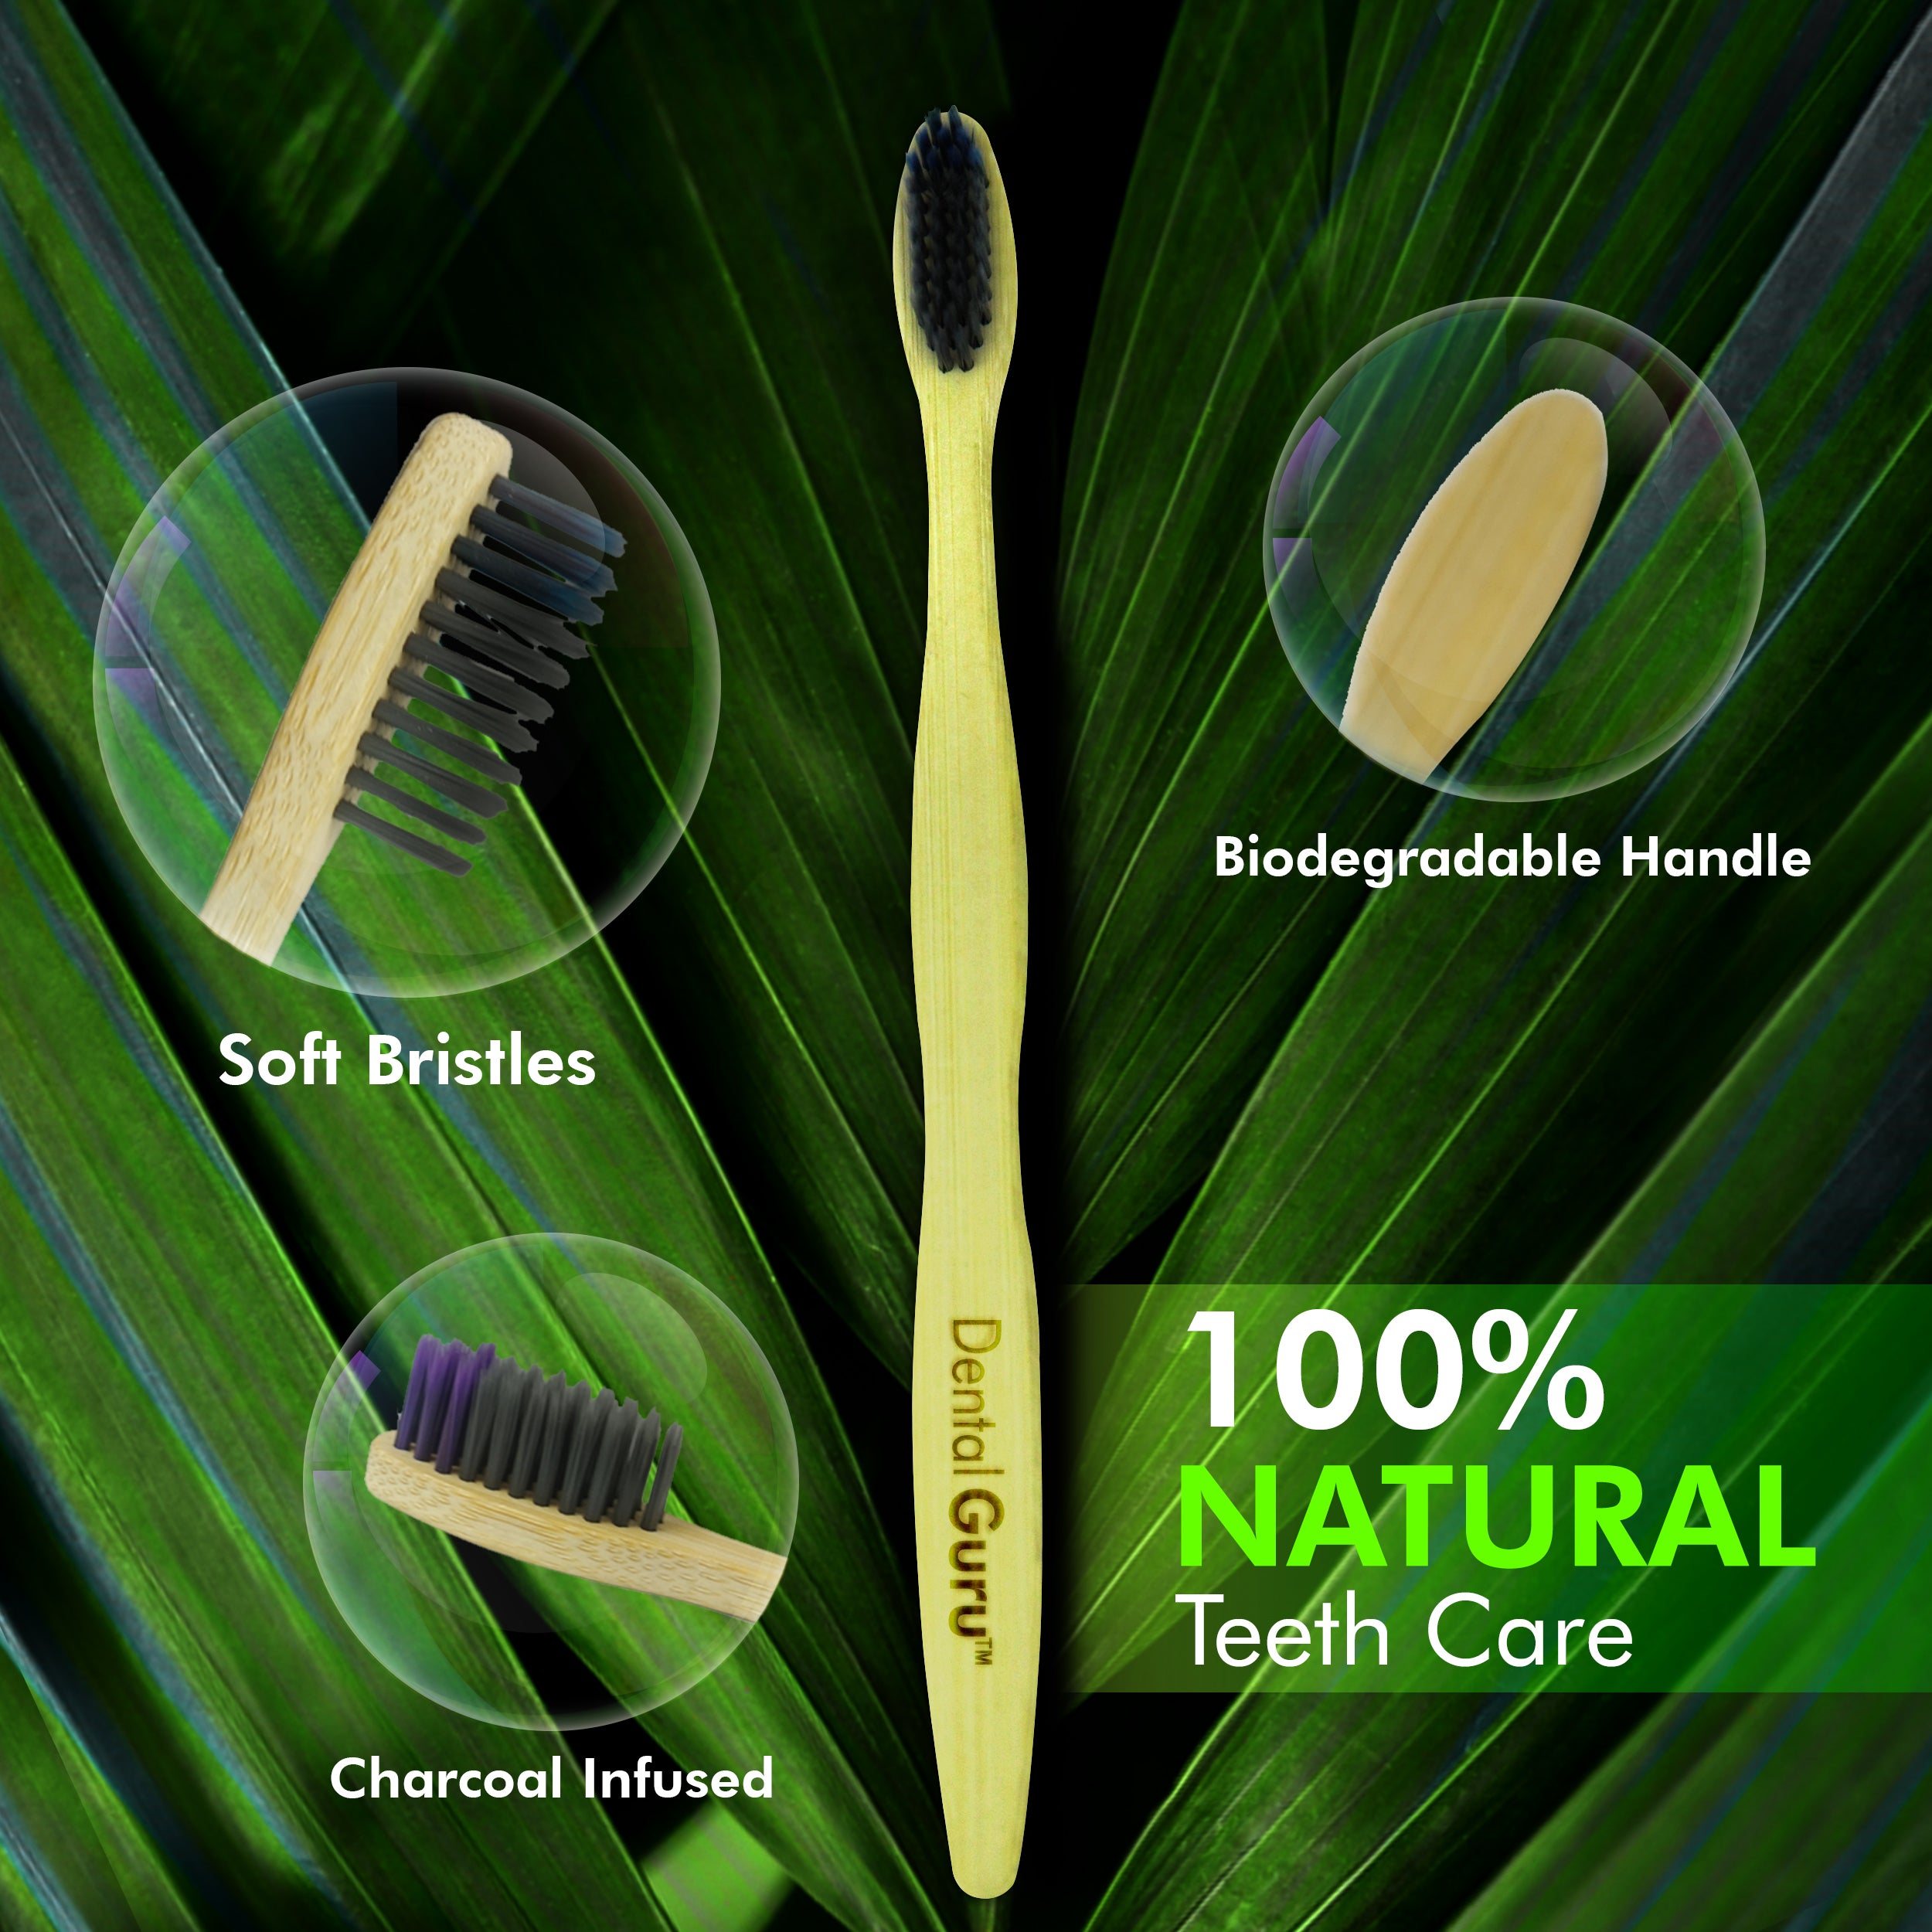 Bamboo Charcoal Toothbrush (pack of 18)- Wholesale Only, Contact to Purchase